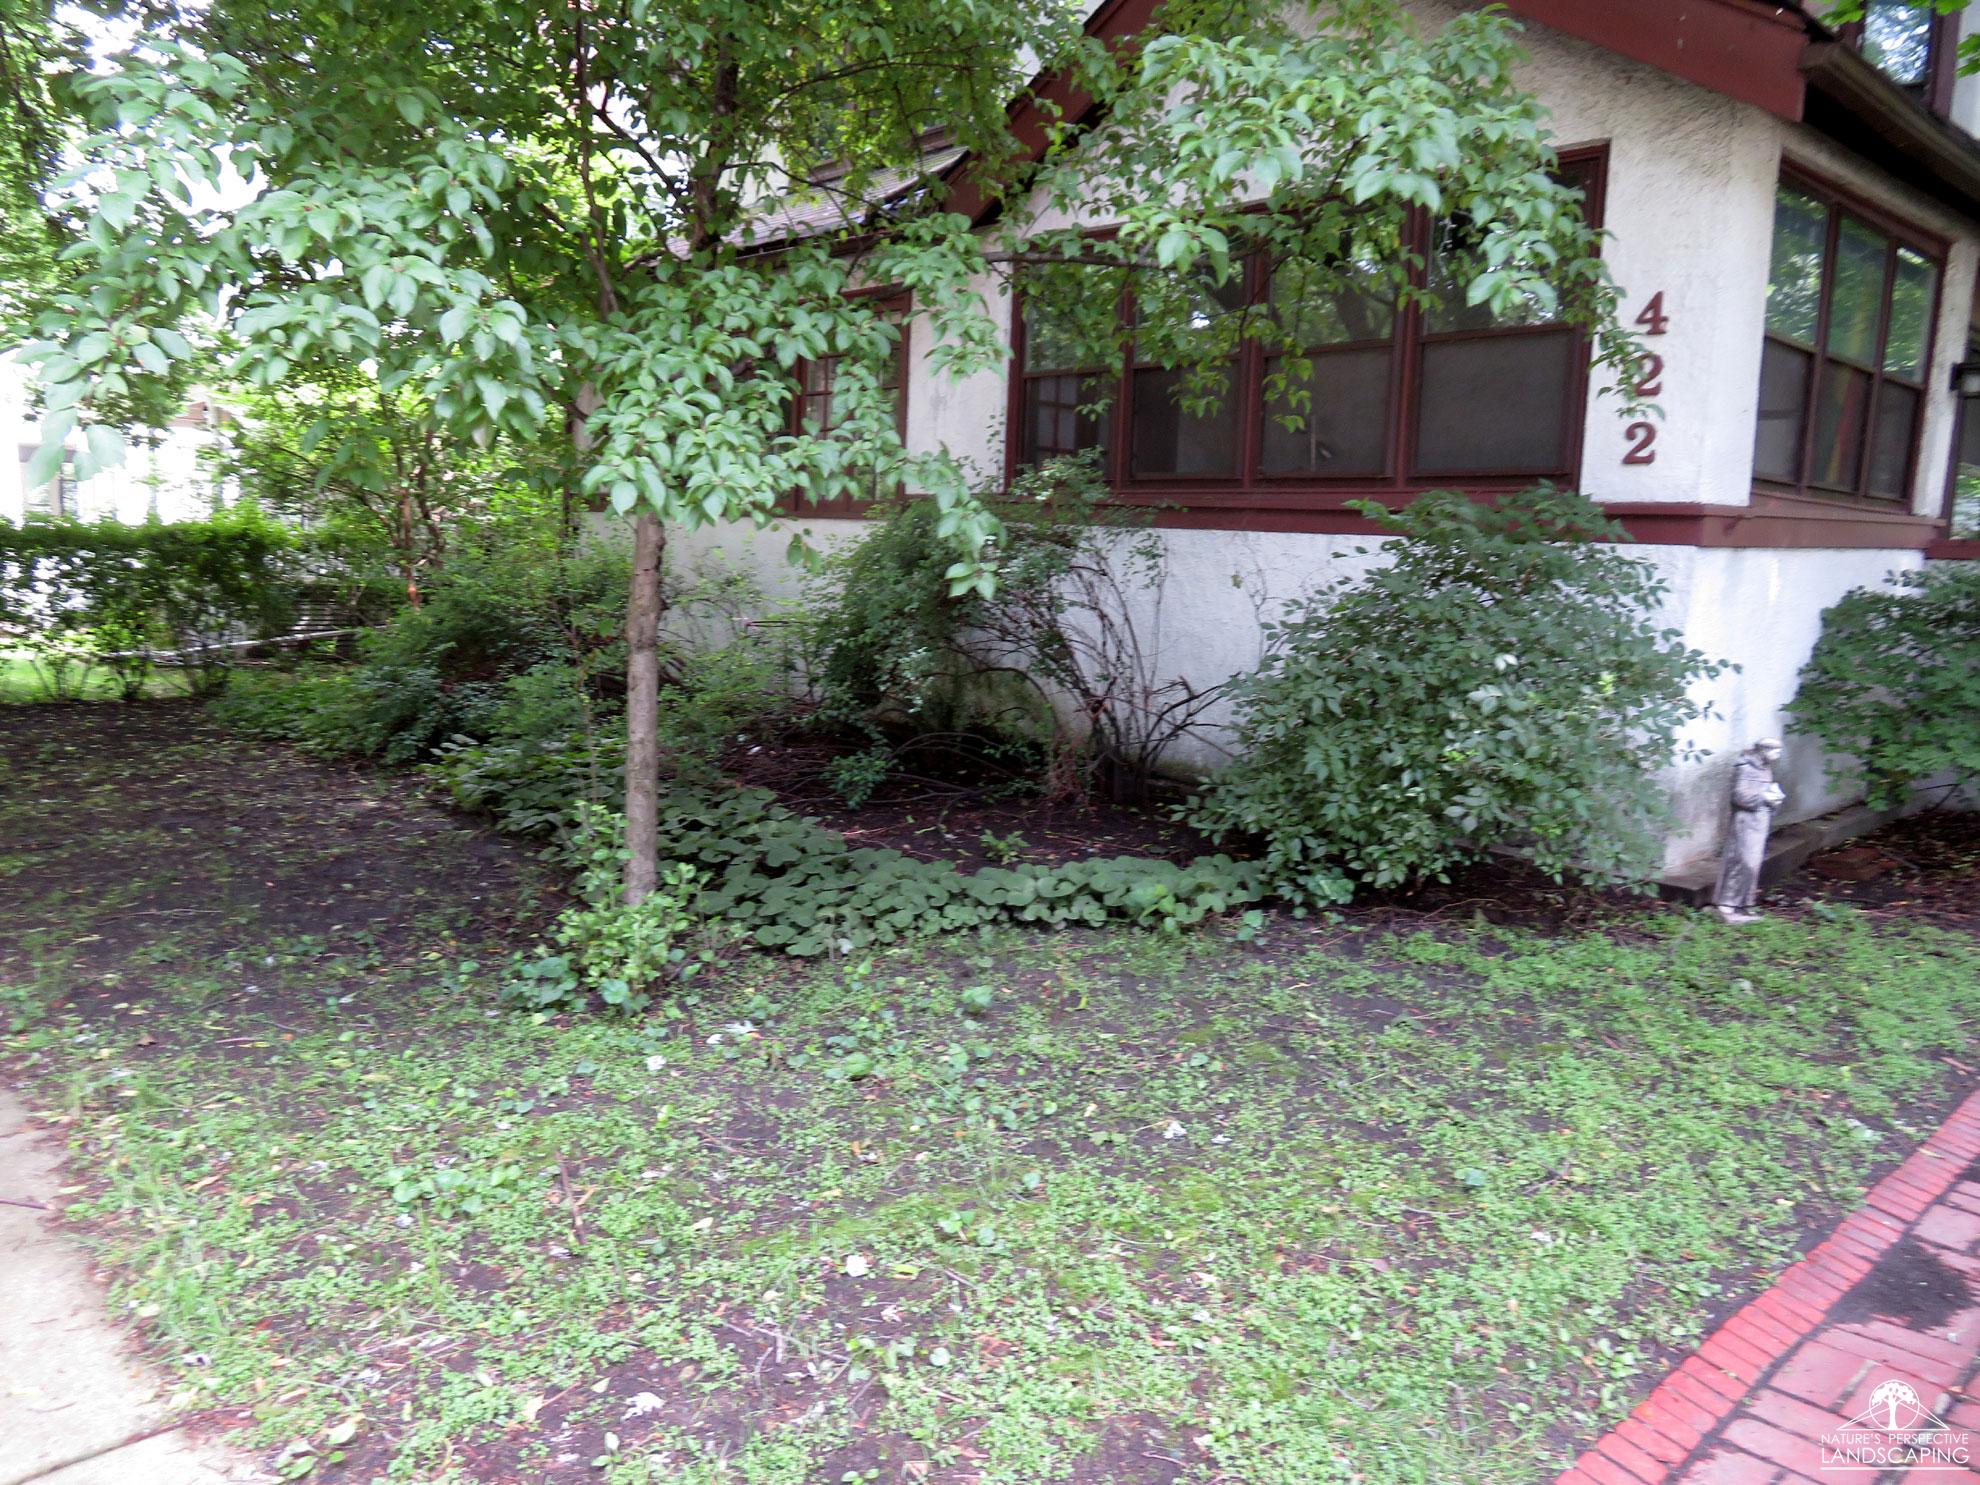 before photo of weedy front yard with unsightly plants